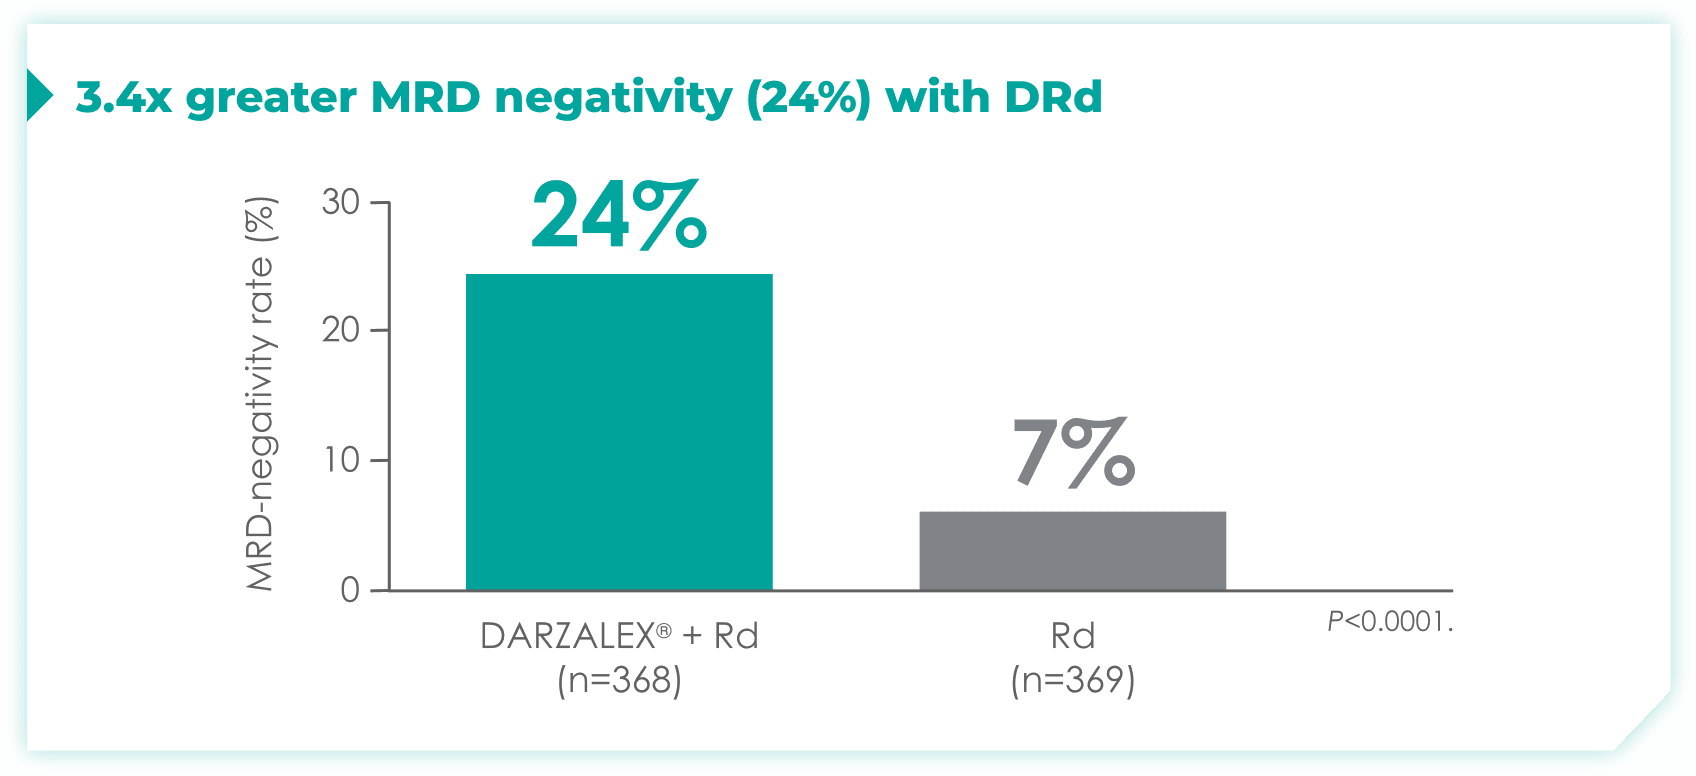 3.4x greater MRD negativity (24%) with DRd